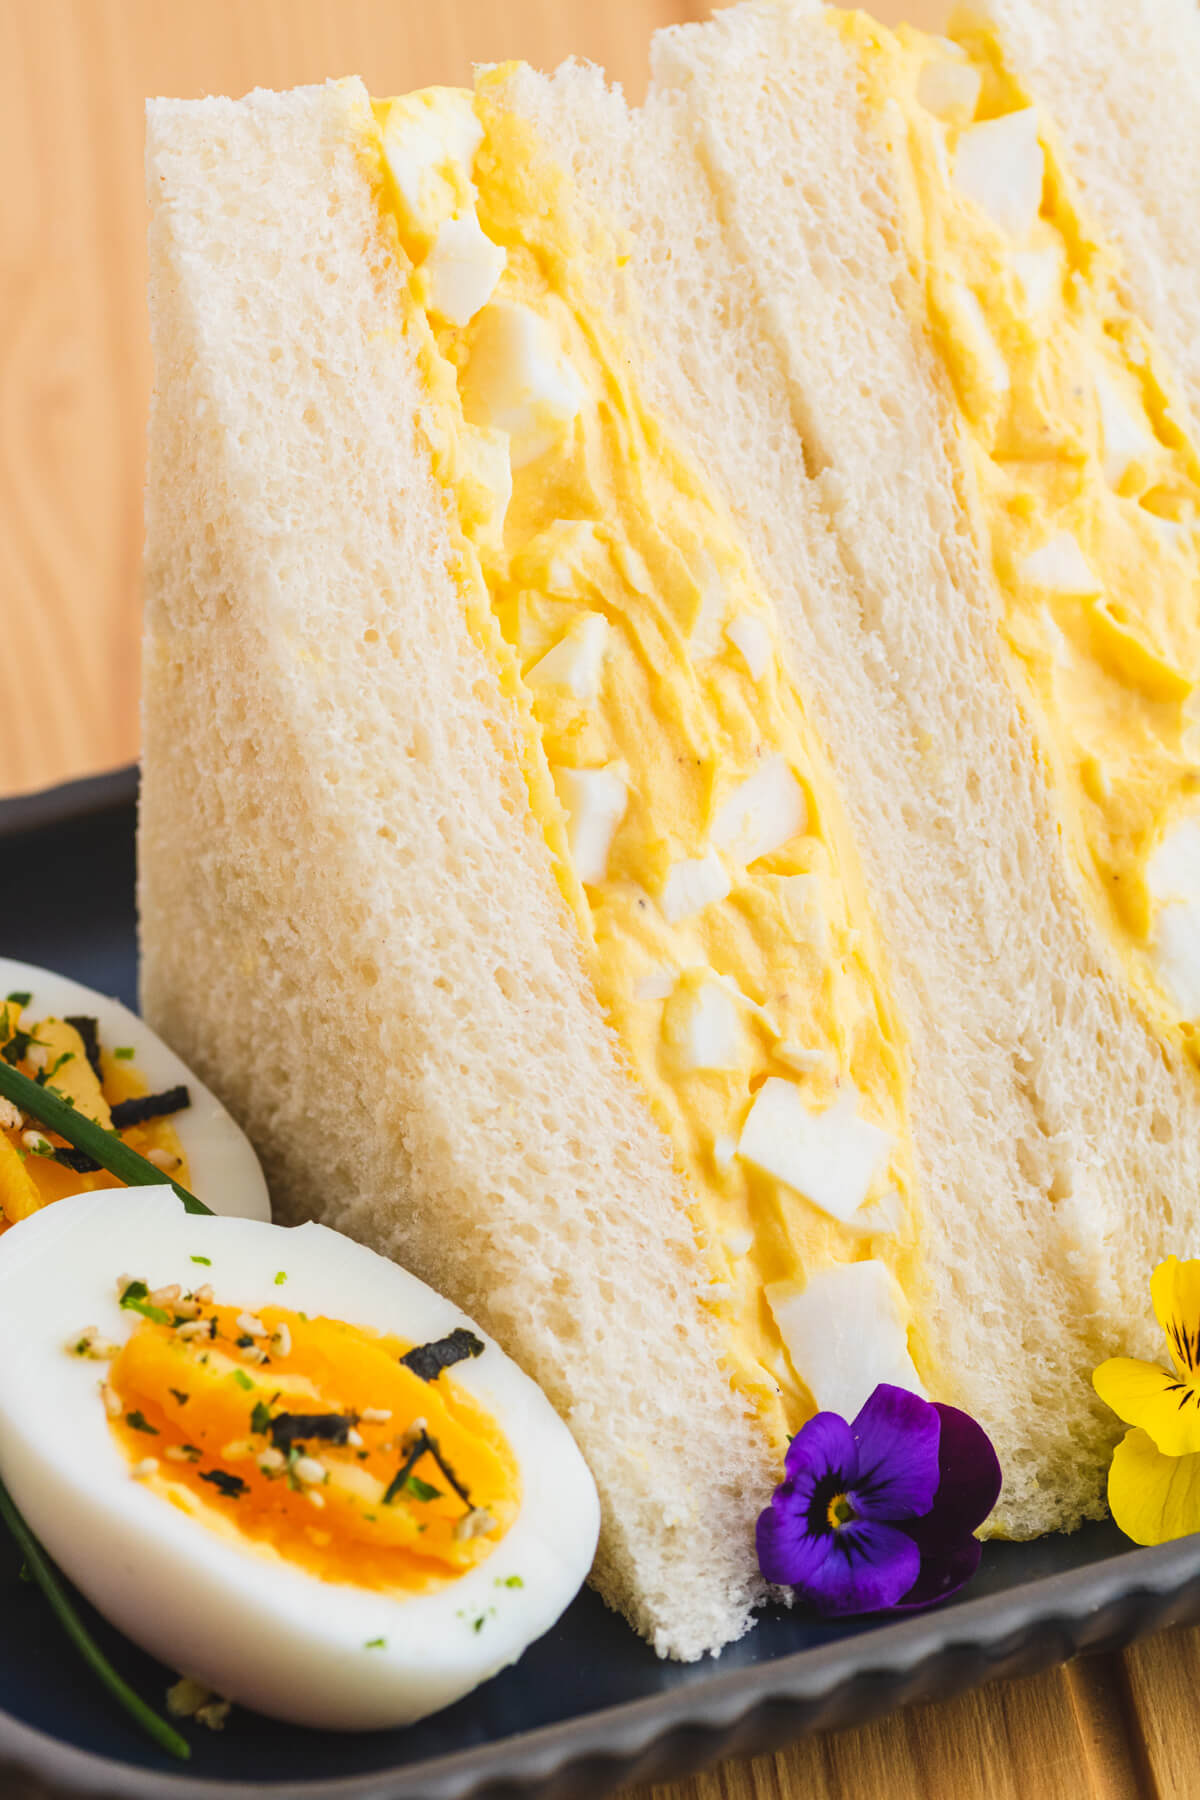 Two rich yellow egg salad sandwiches on fluffy white crust less bread on a plate garnished with a hard boiled egg and edible flowers.